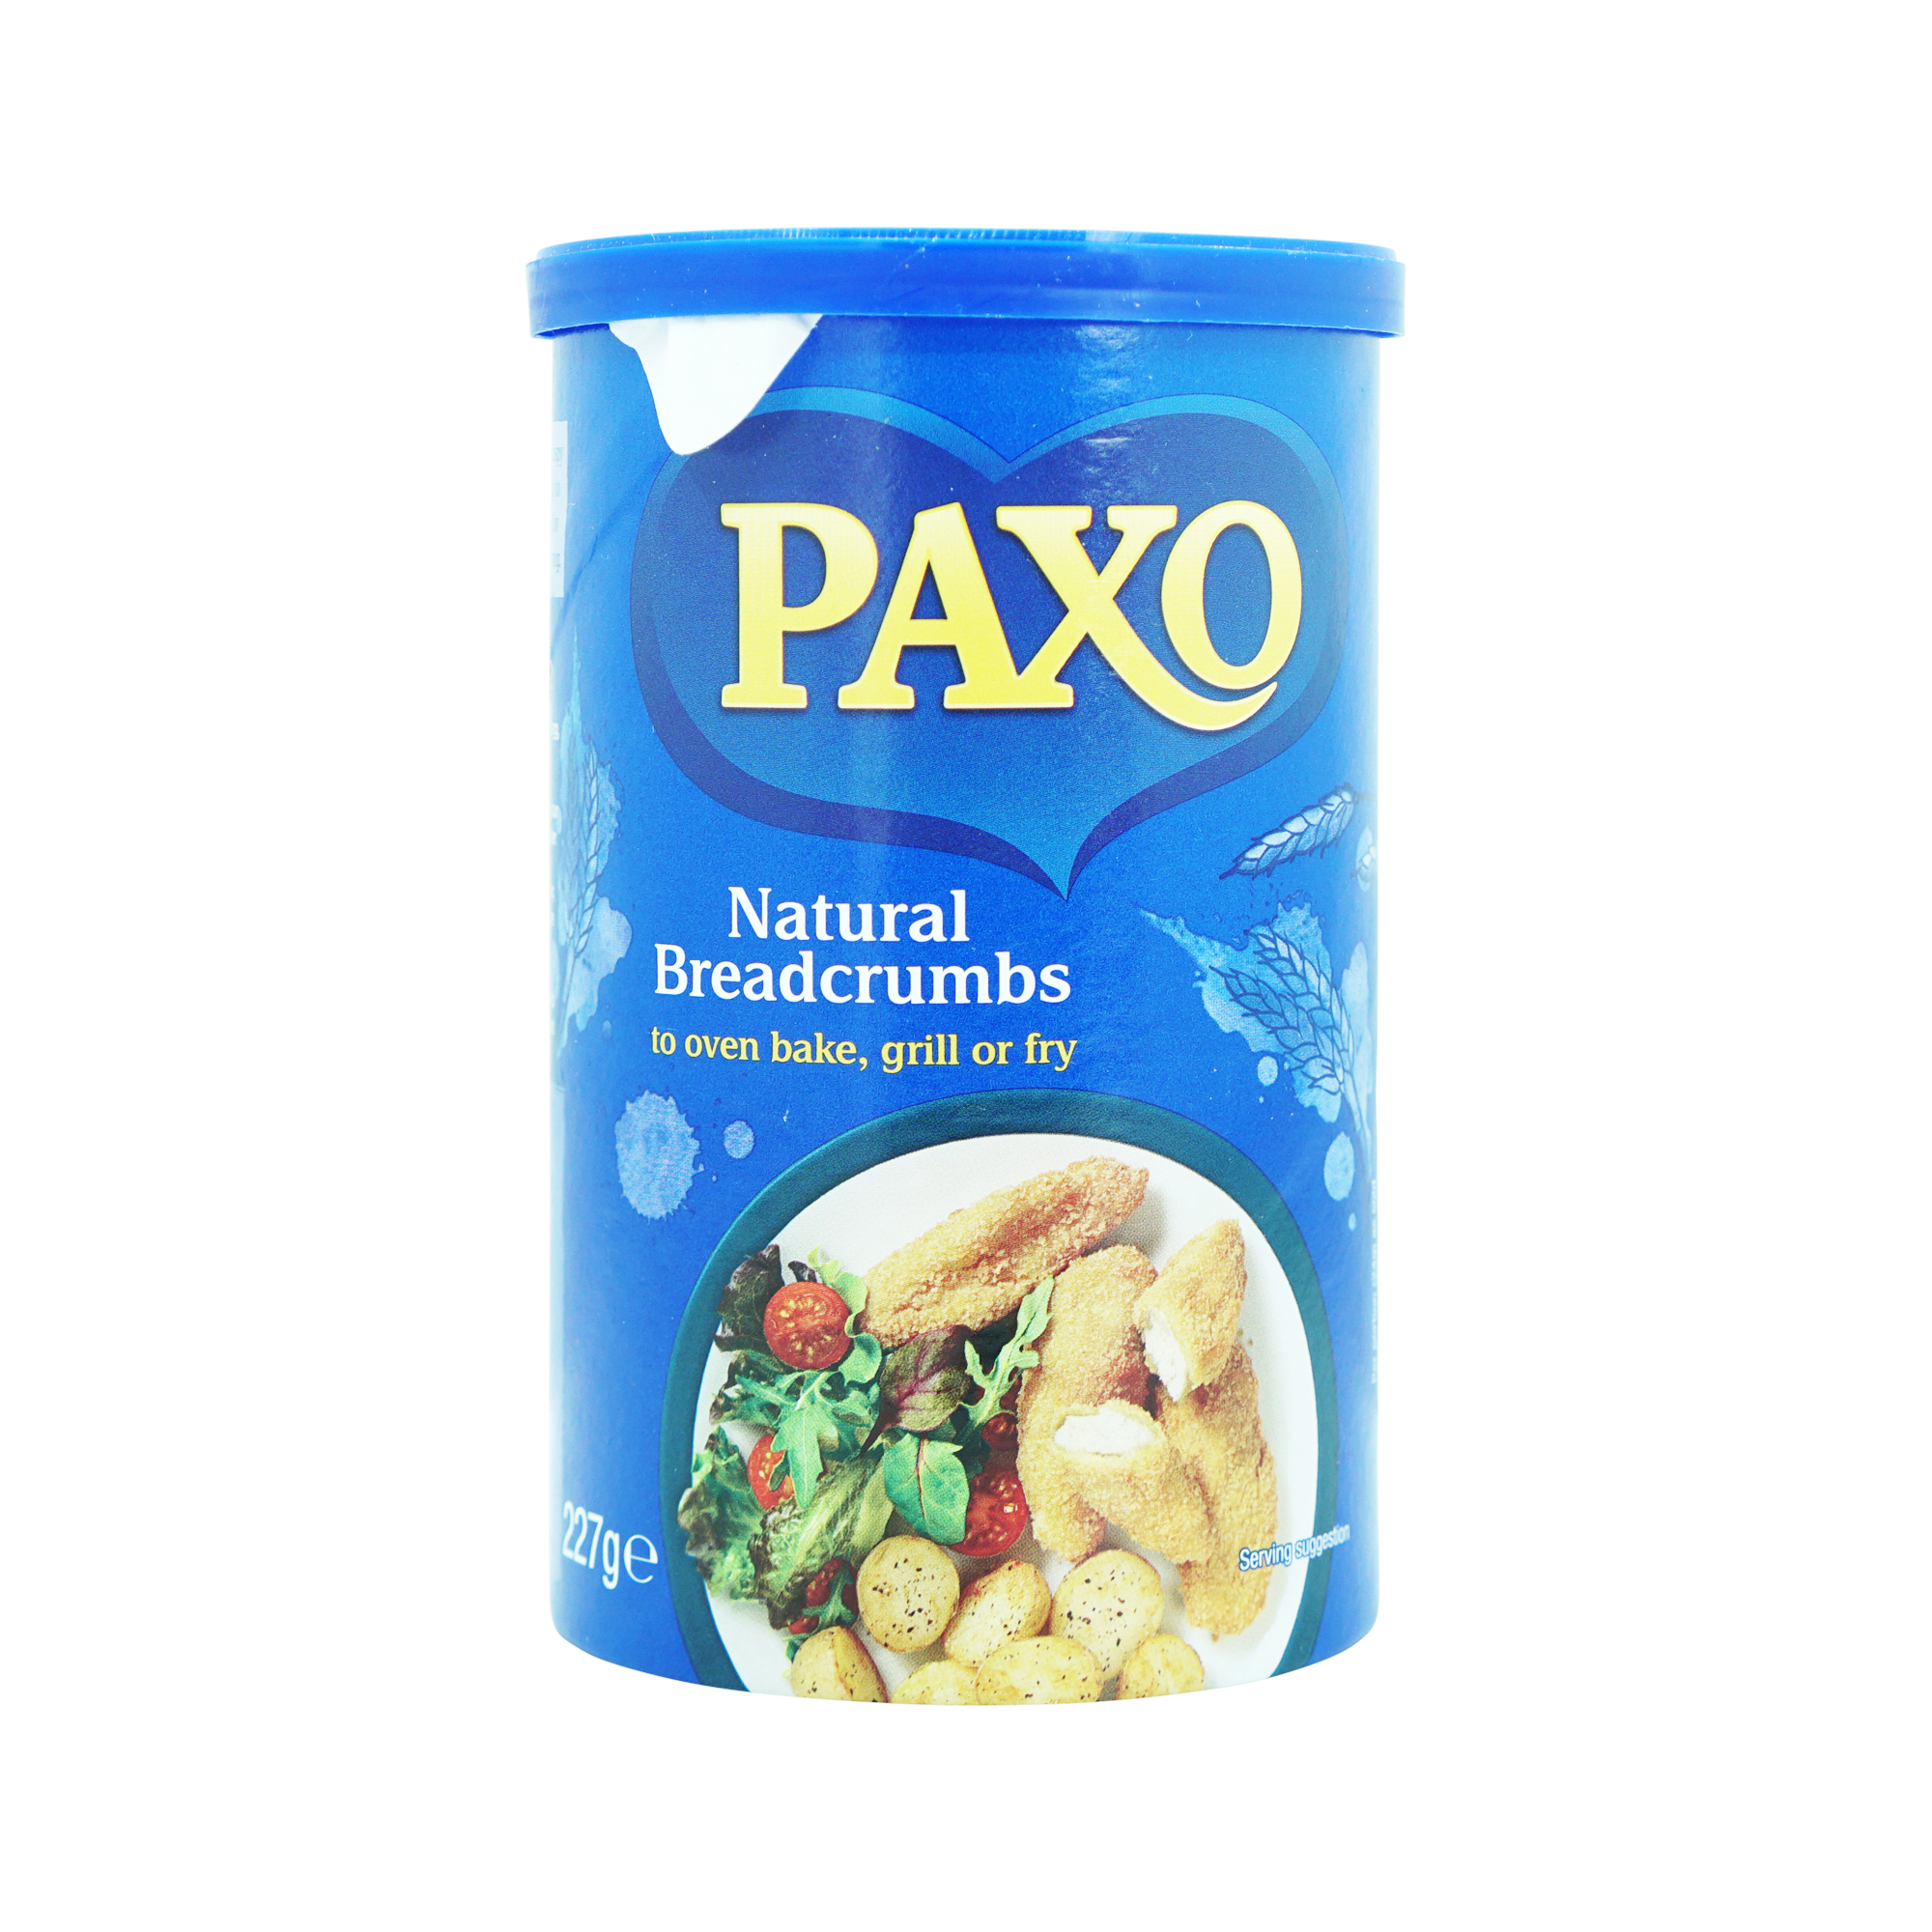 Paxo Natural Breadcrumbs (227g)